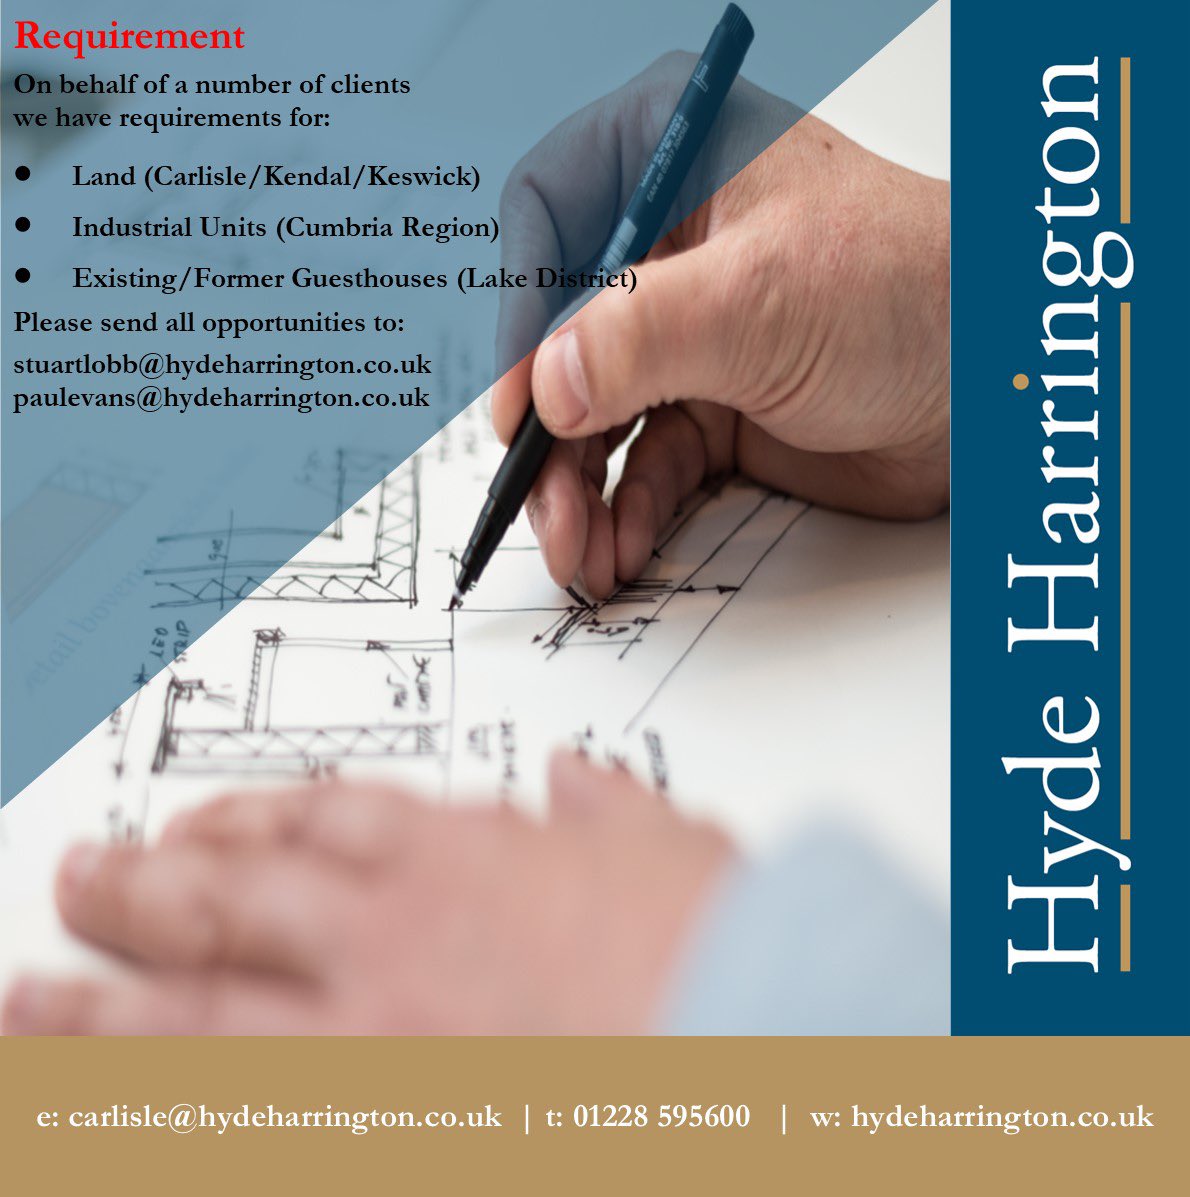 Hyde Harrington have requirements in #Cumbria. Please get in touch if you have any opportunities. 

#land #developmentland #residentialland #propertydevelopment #property #industrial #industrialdevelopment #commercialproperty #commercialsurvey #carlisle #kendal #lakedistrict